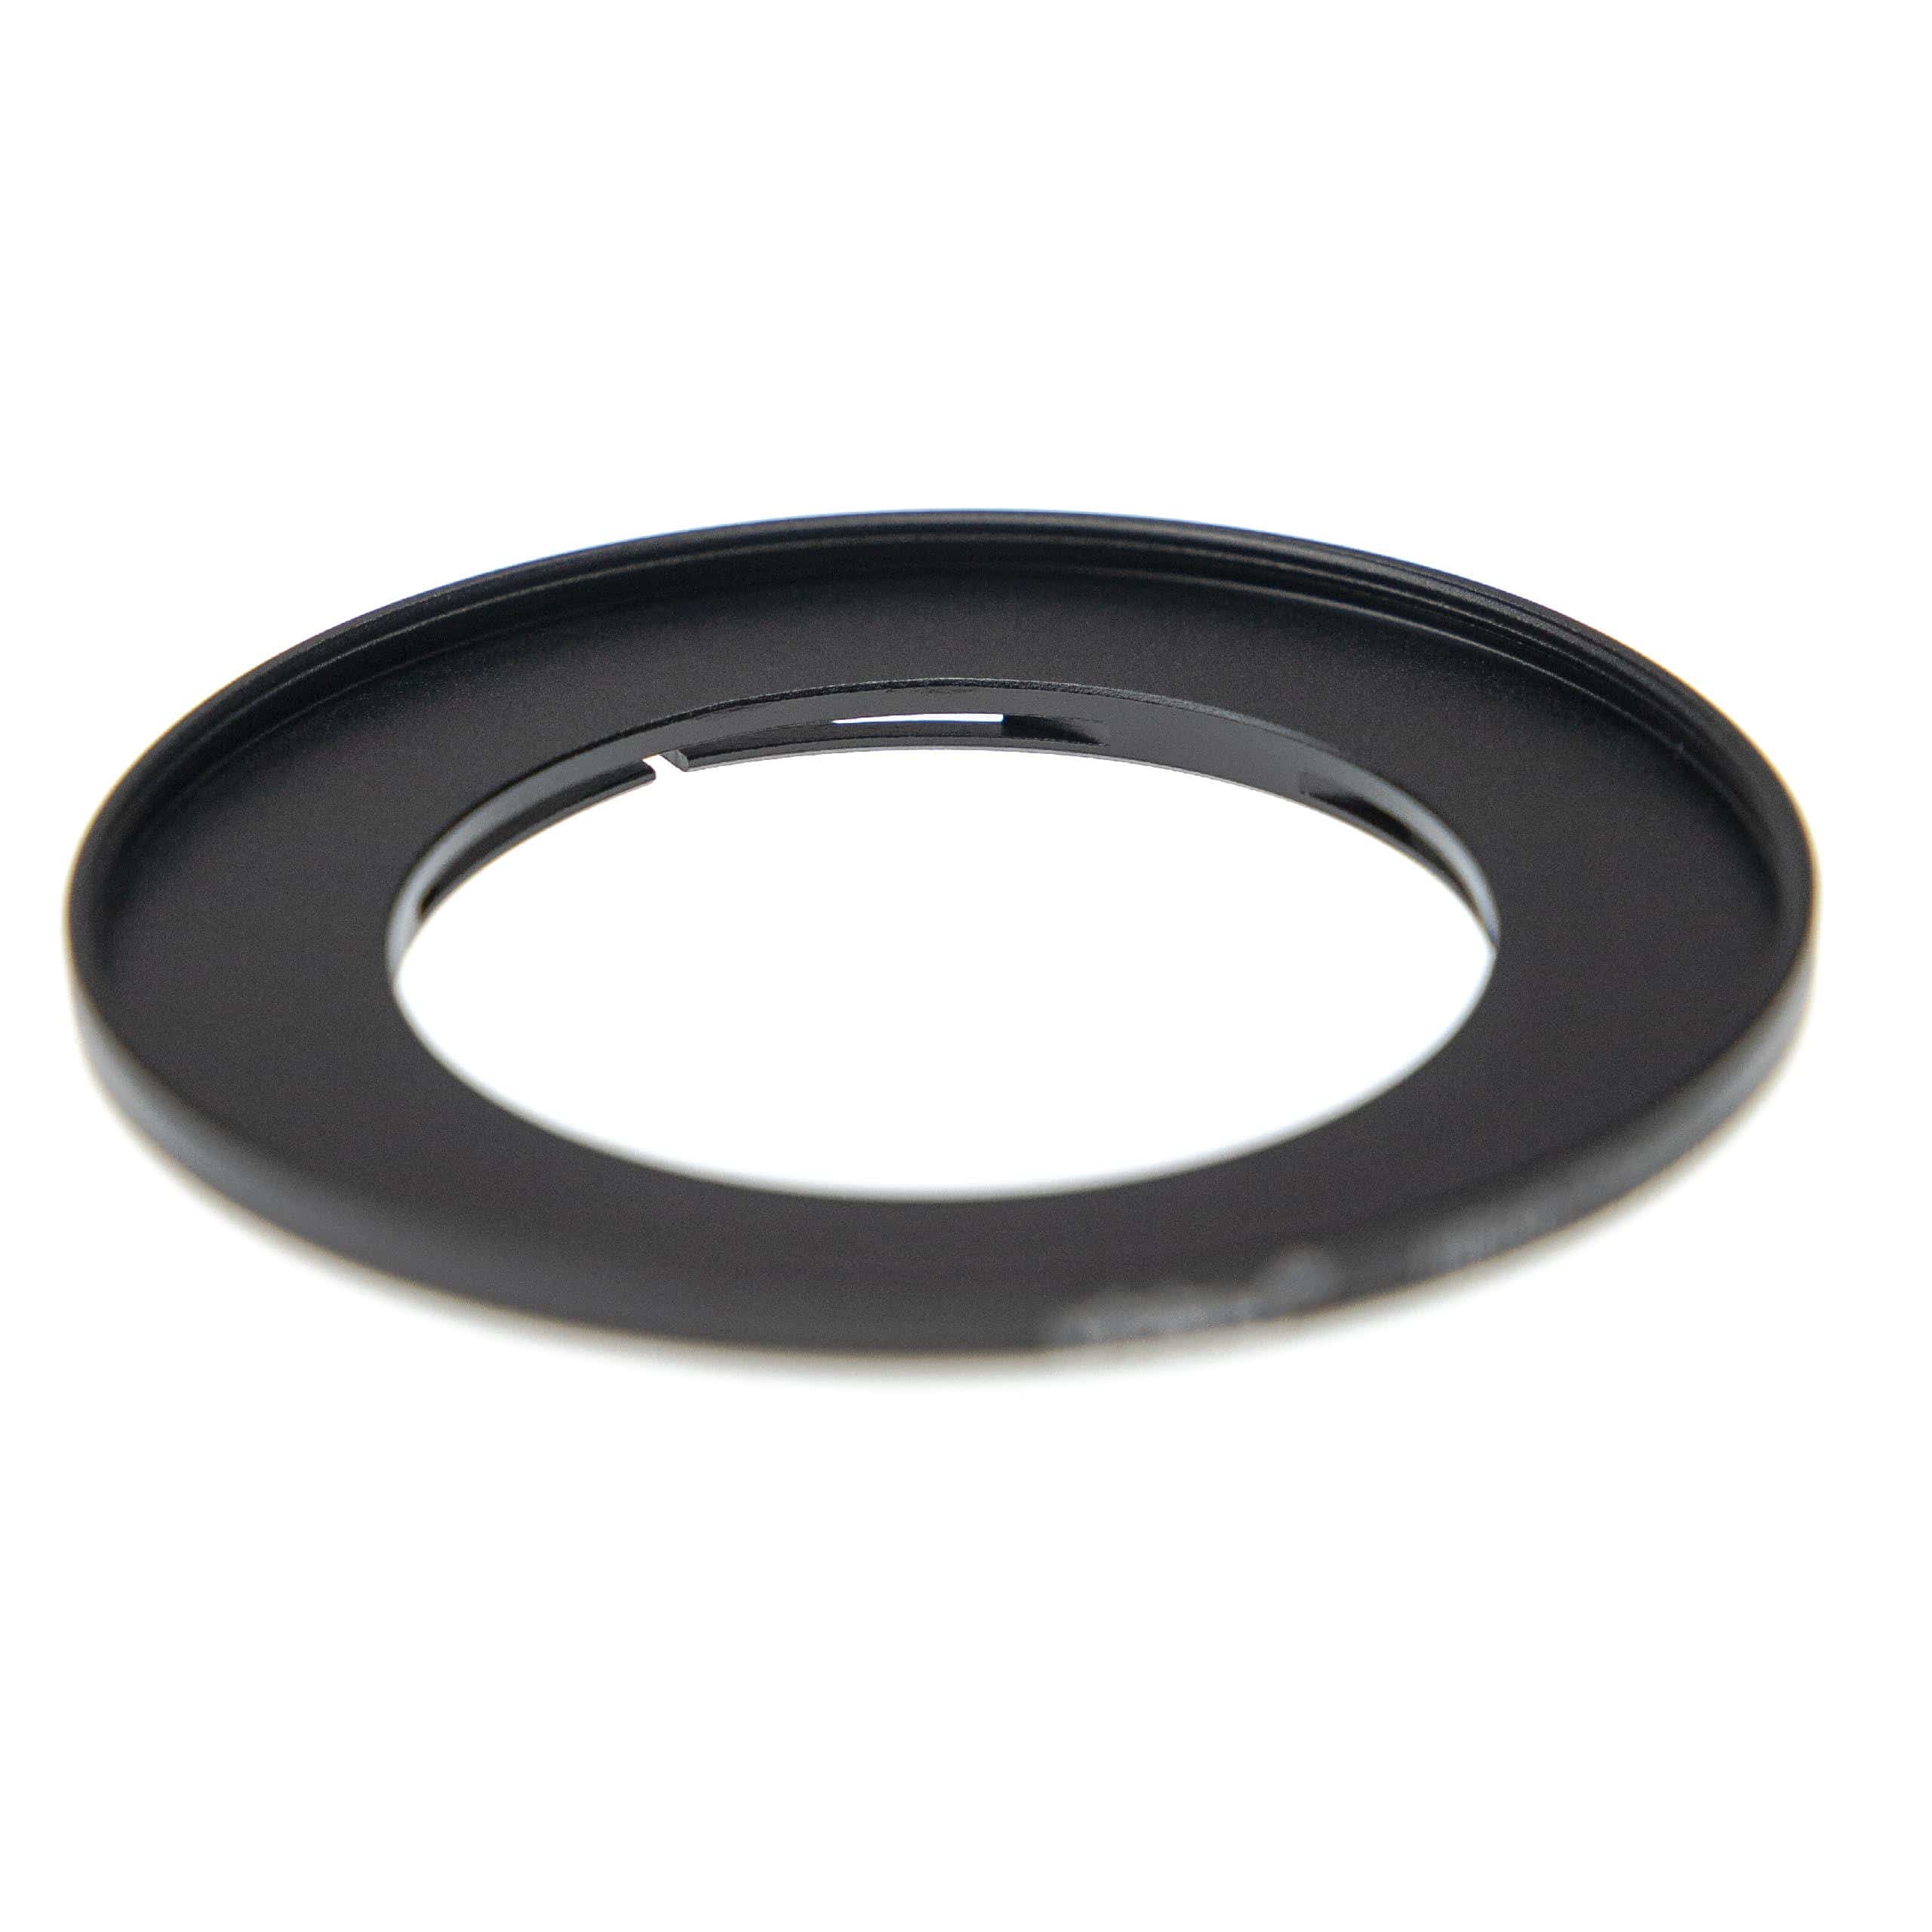 77 mm Filter Adapter suitable for Hasselblad B50 bayonet Camera Lens